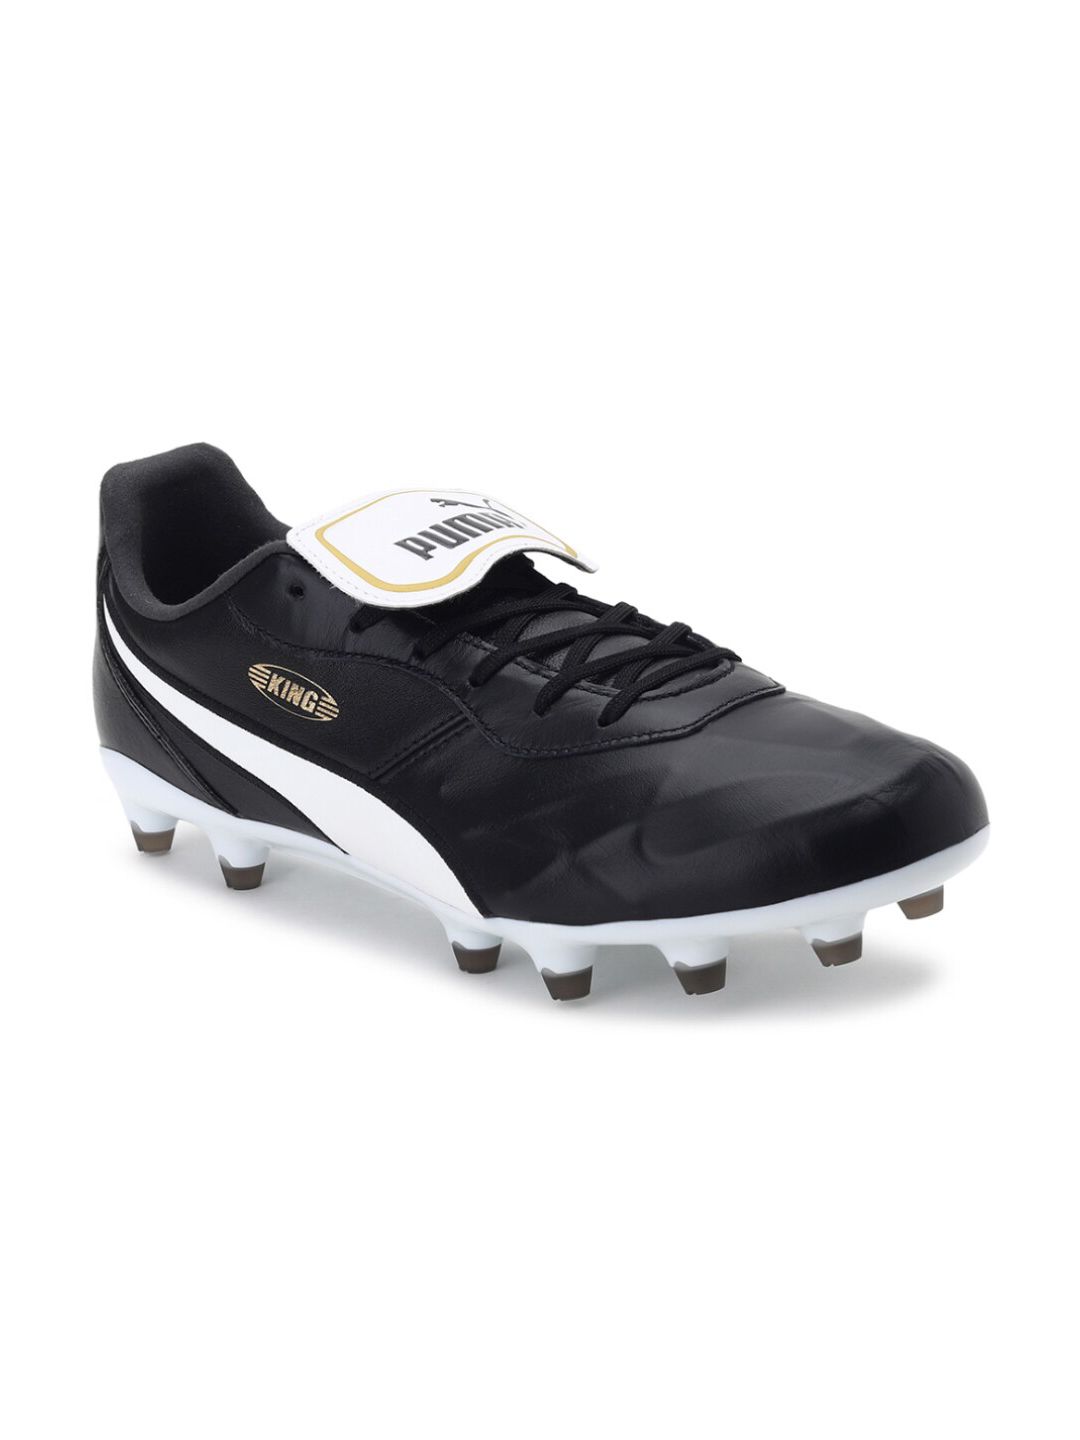 Puma Unisex Black Leather KING Top FG  Football Shoes Price in India